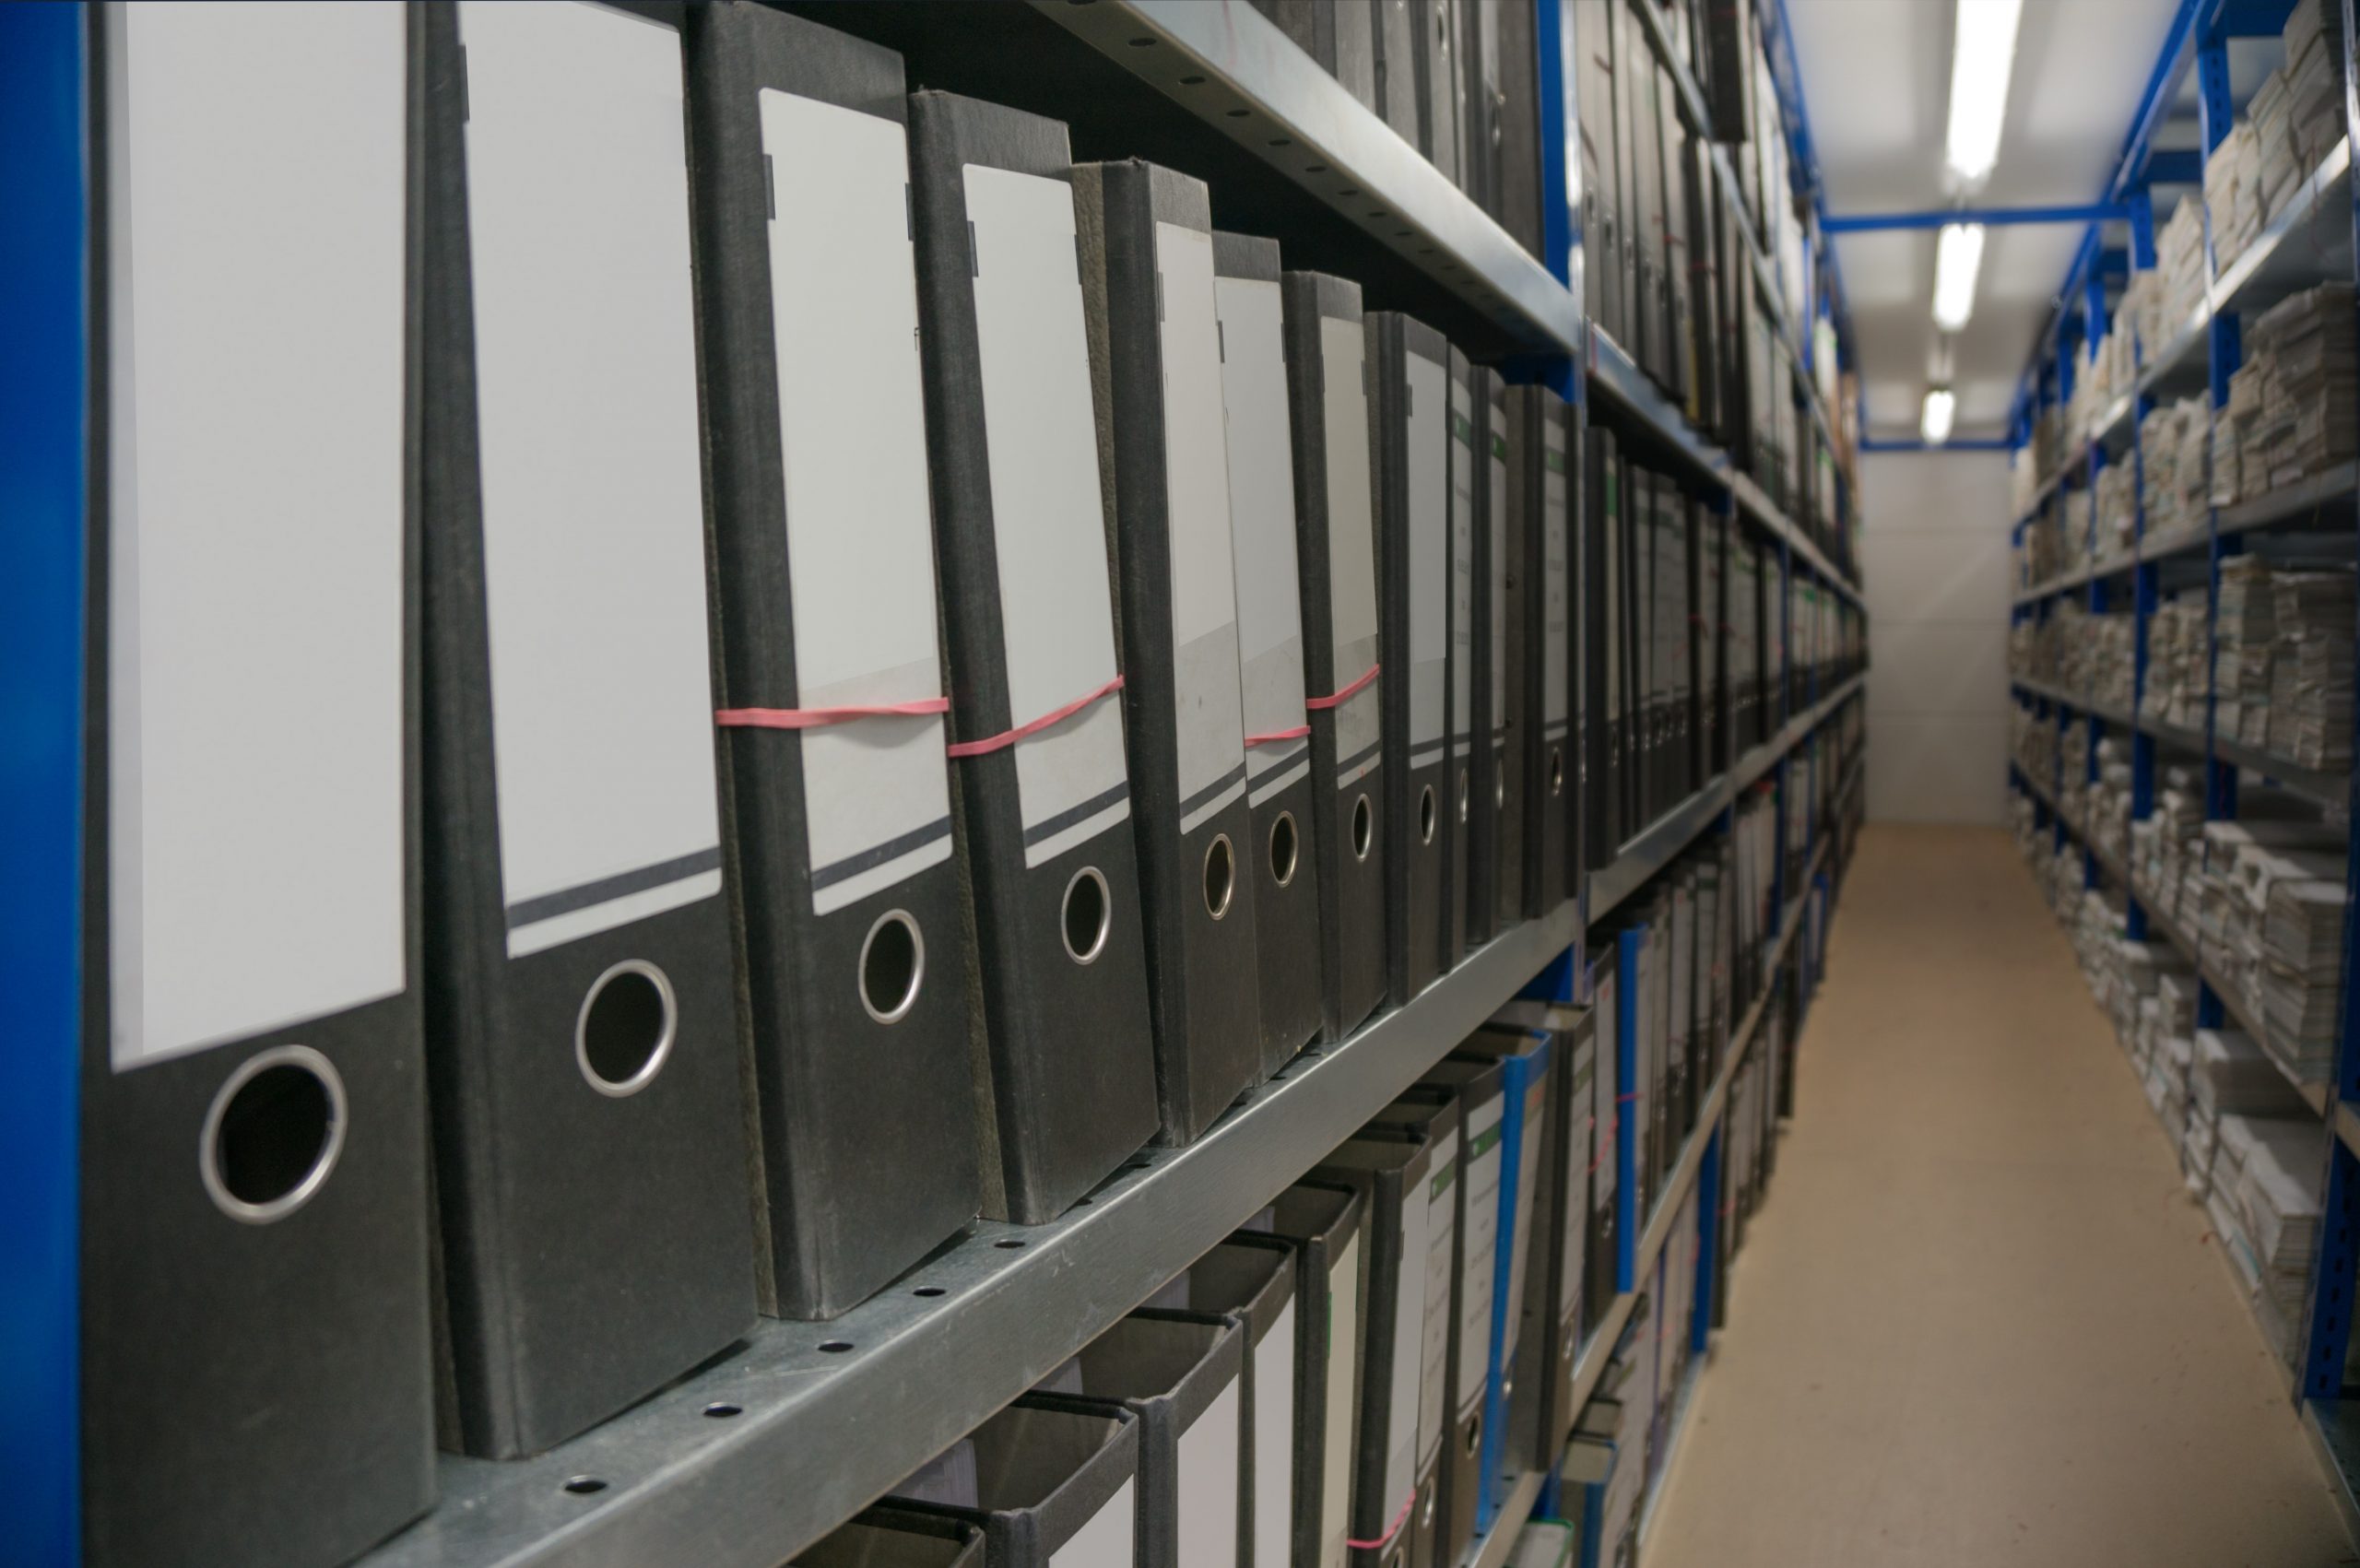 DIGITAL TRANSFORMATION HAS STARTED: IMM DIGITALIZES ARCHIVES